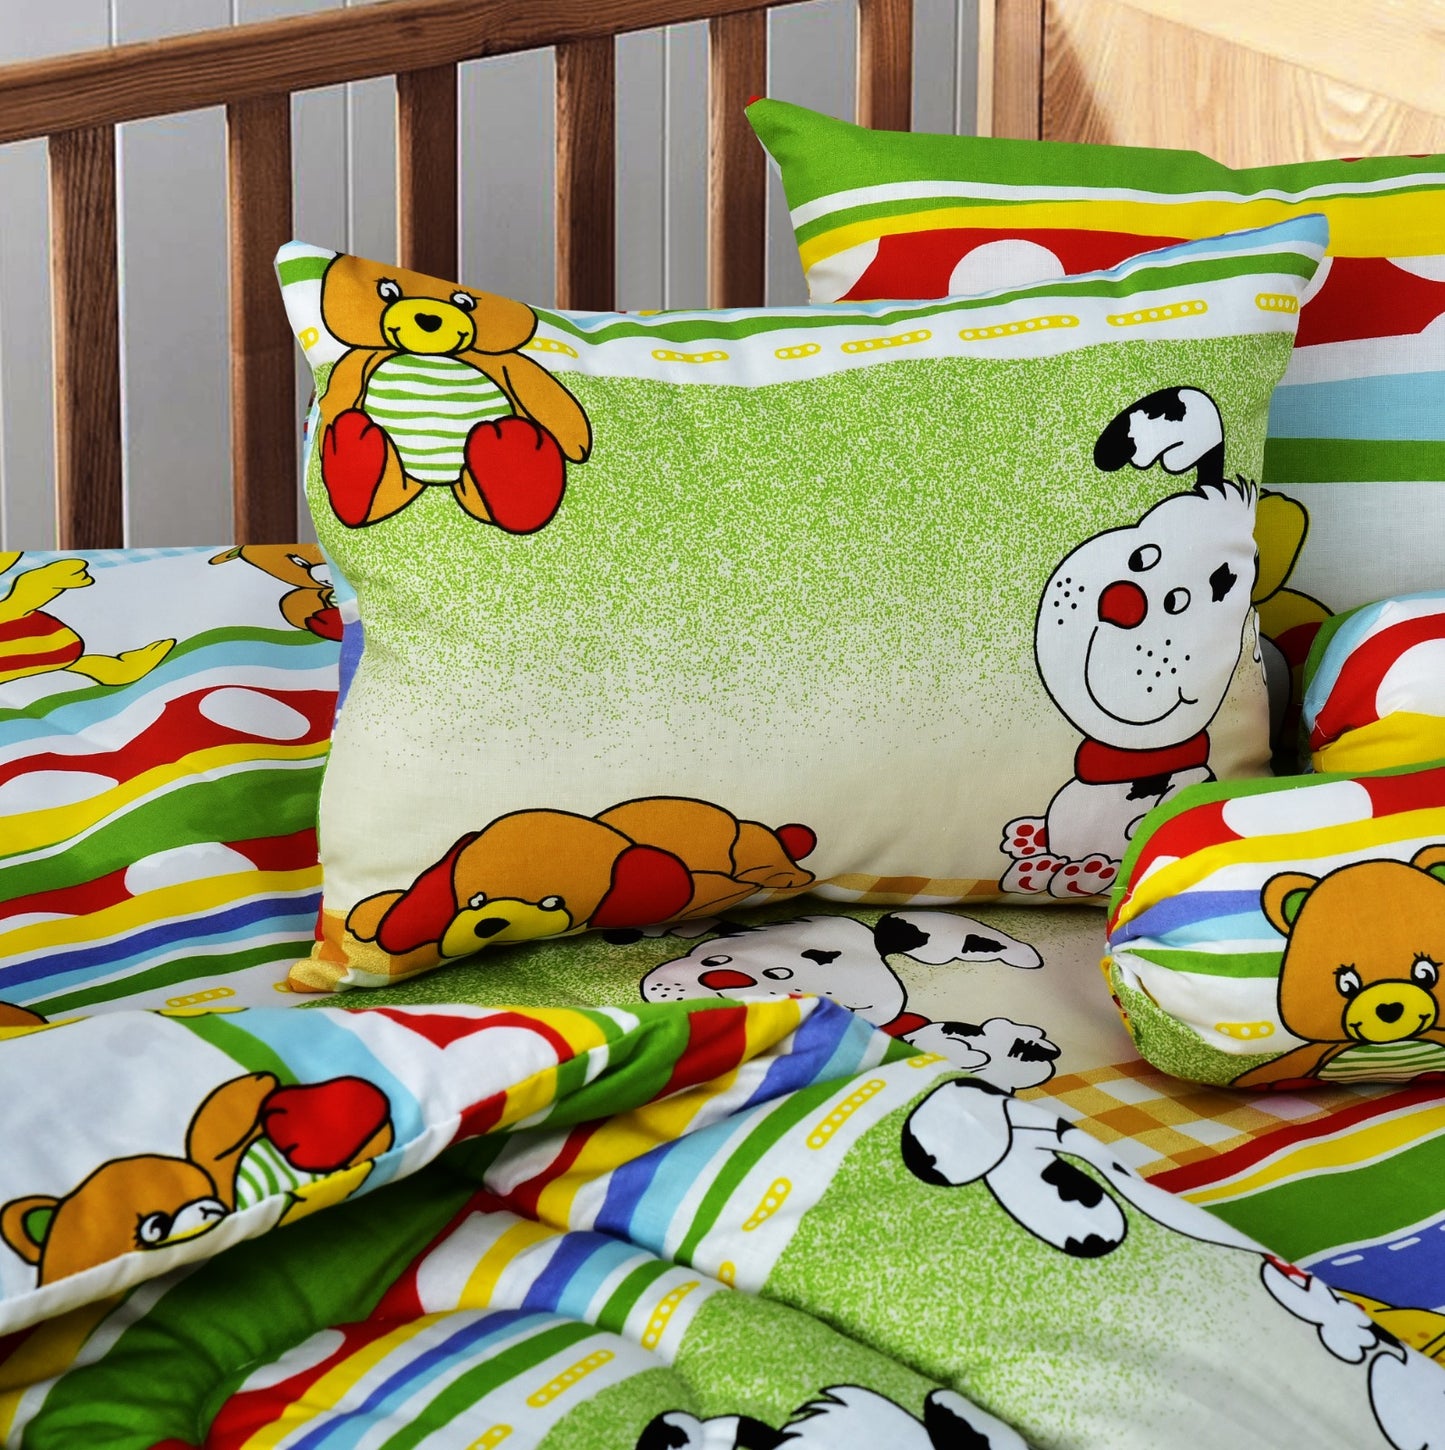 7 PCs Baby Cot Set With Waterproof Sheet- Teddy Bears Apricot